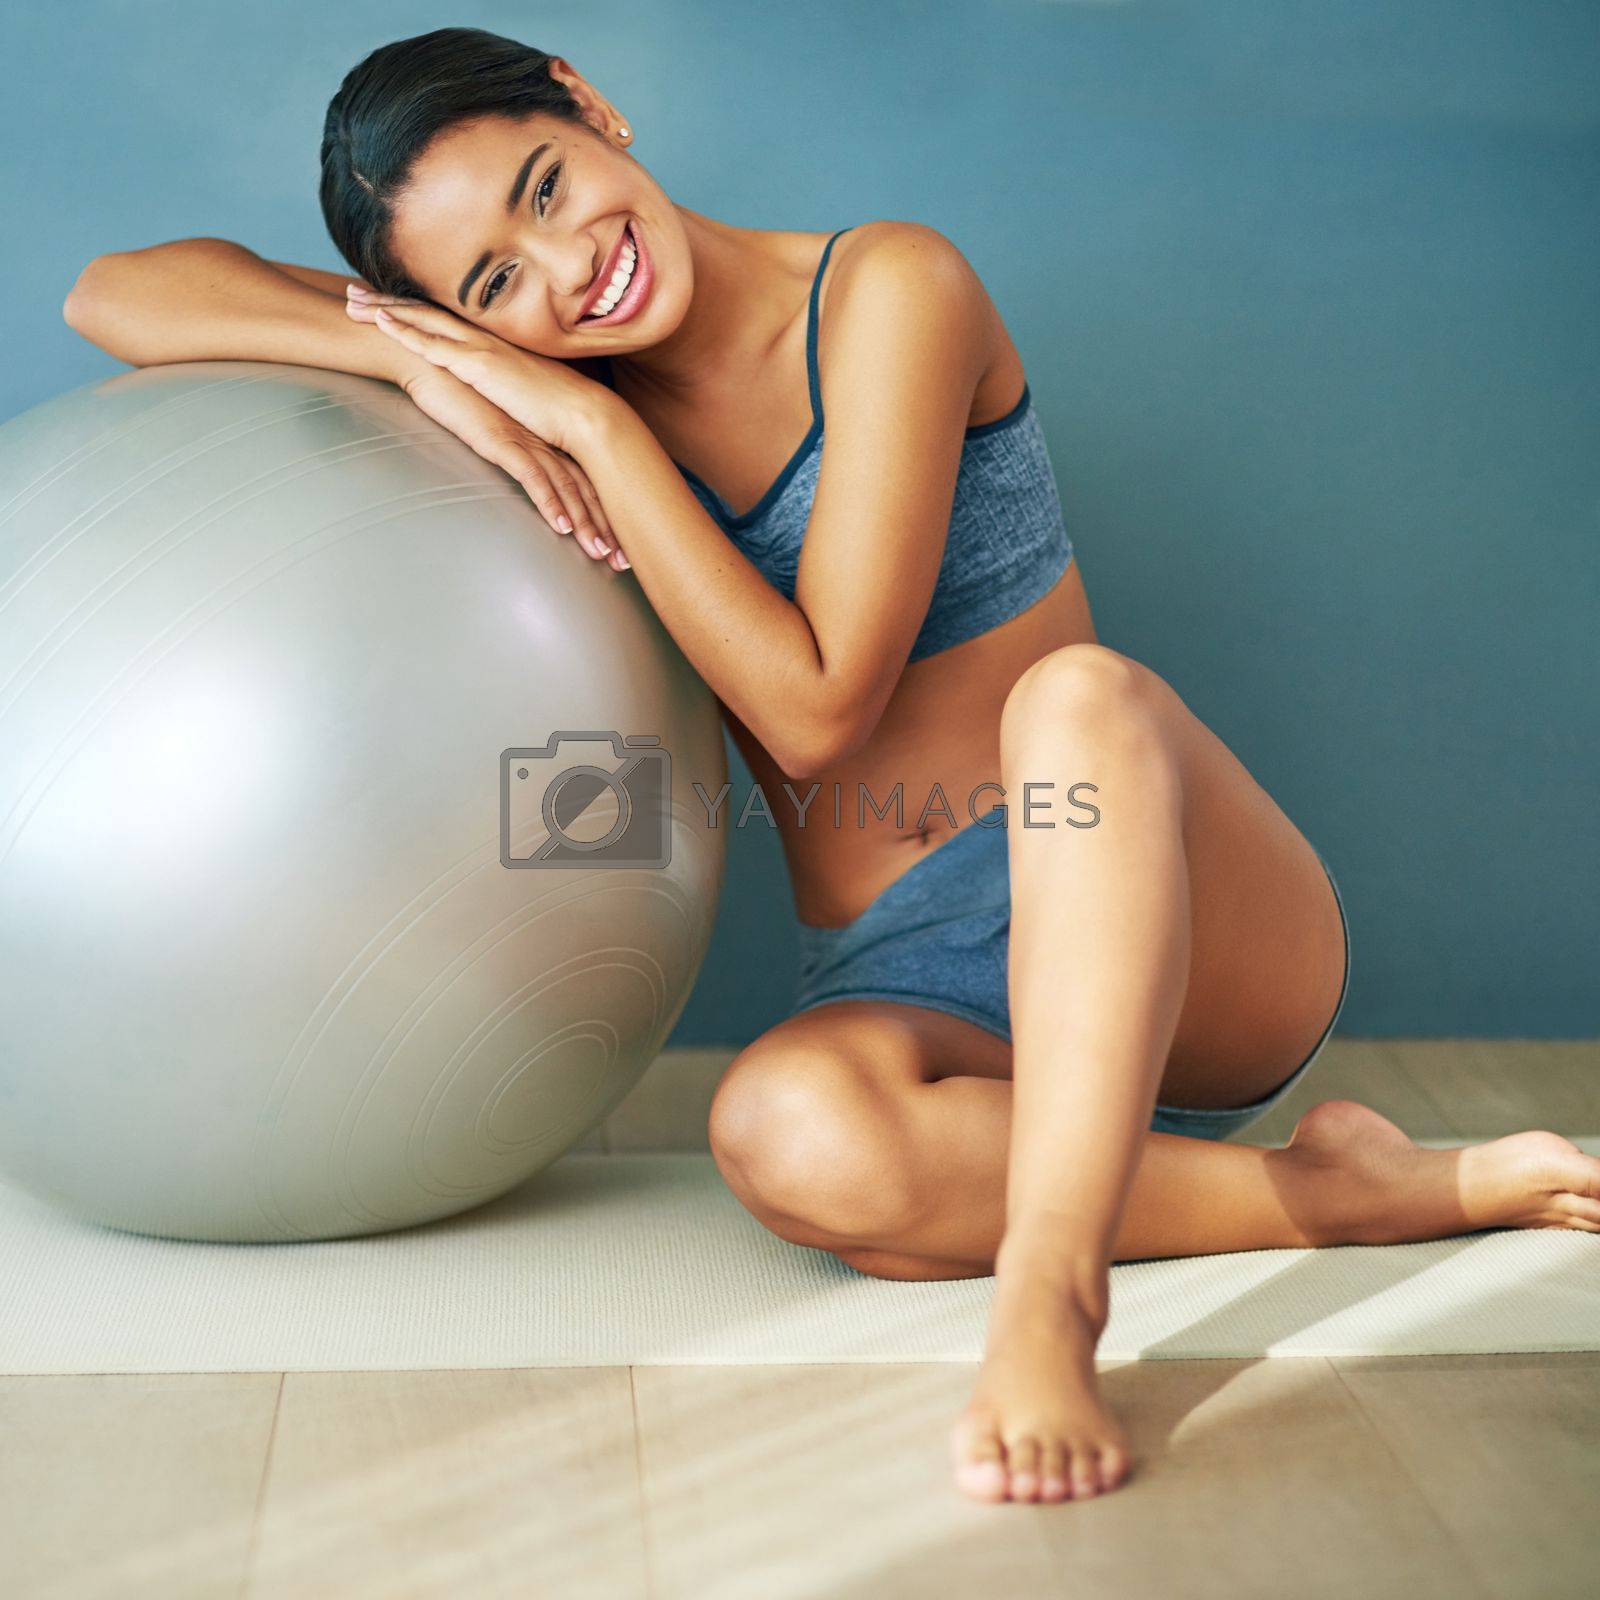 Royalty free image of Live a healthy life. a sporty young woman leaning against a pilates ball. by YuriArcurs